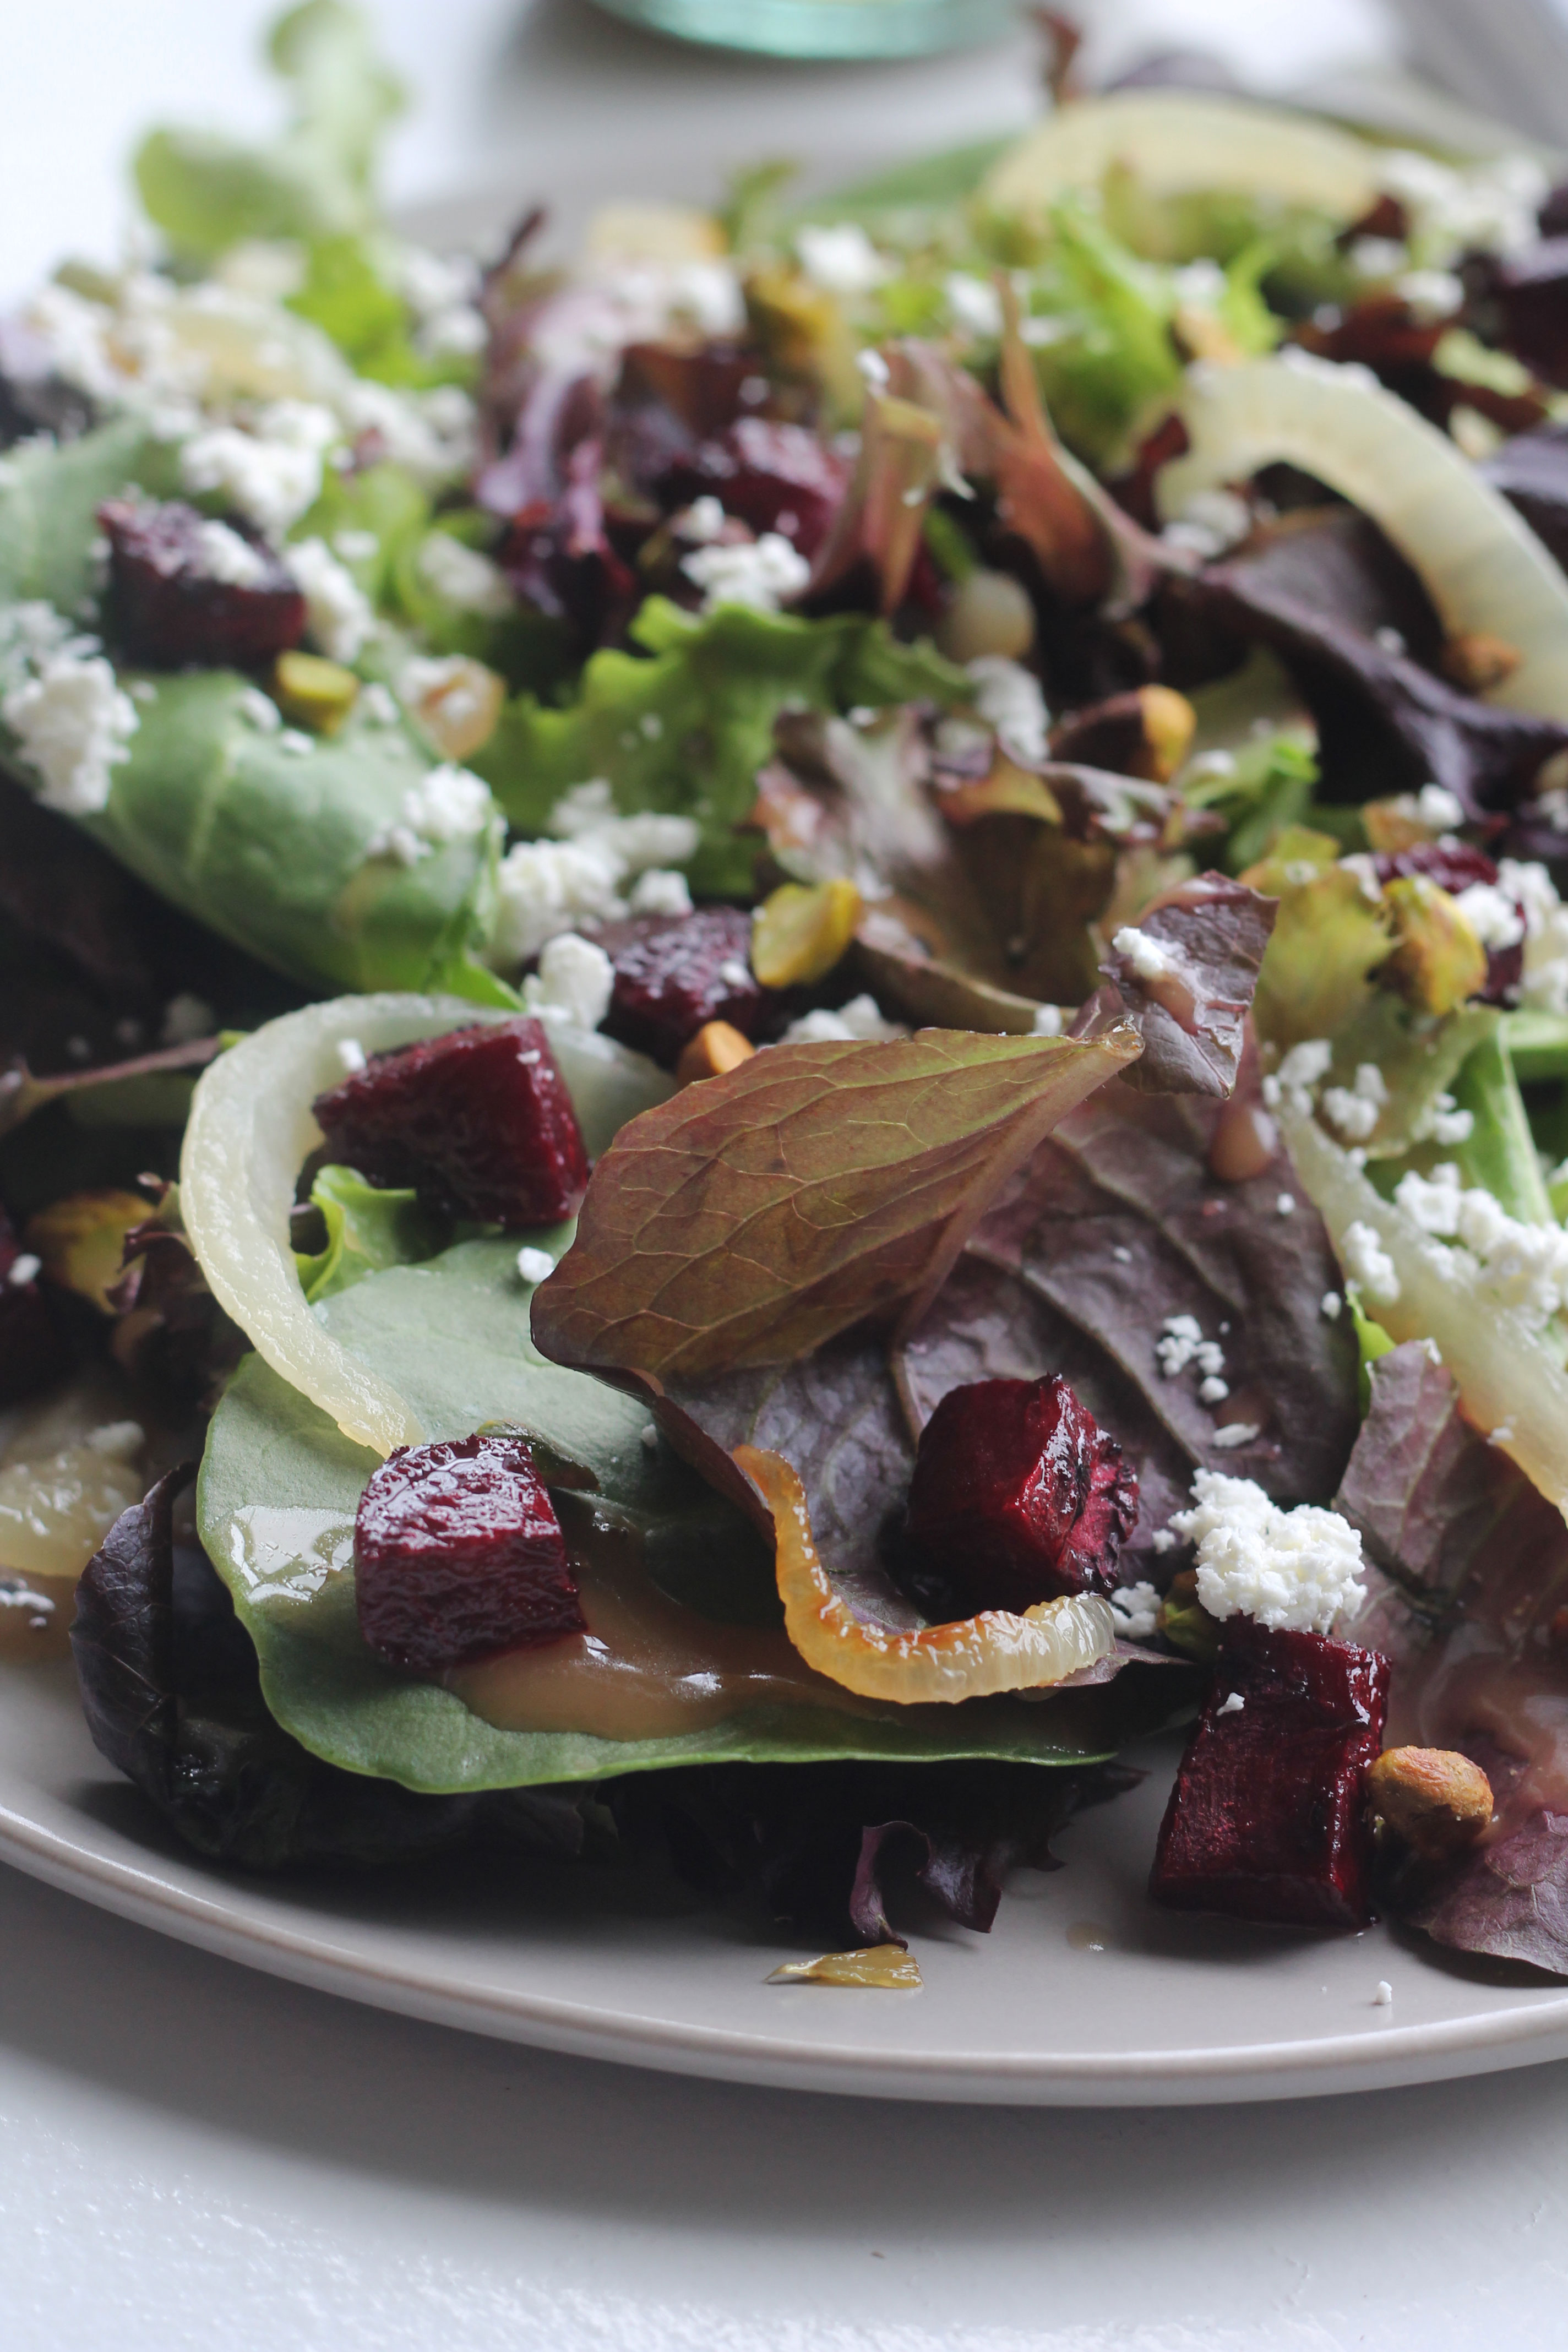 Mixed Greens with Roasted Beets, Caramelized Onions, Goat Cheese and Pistachios